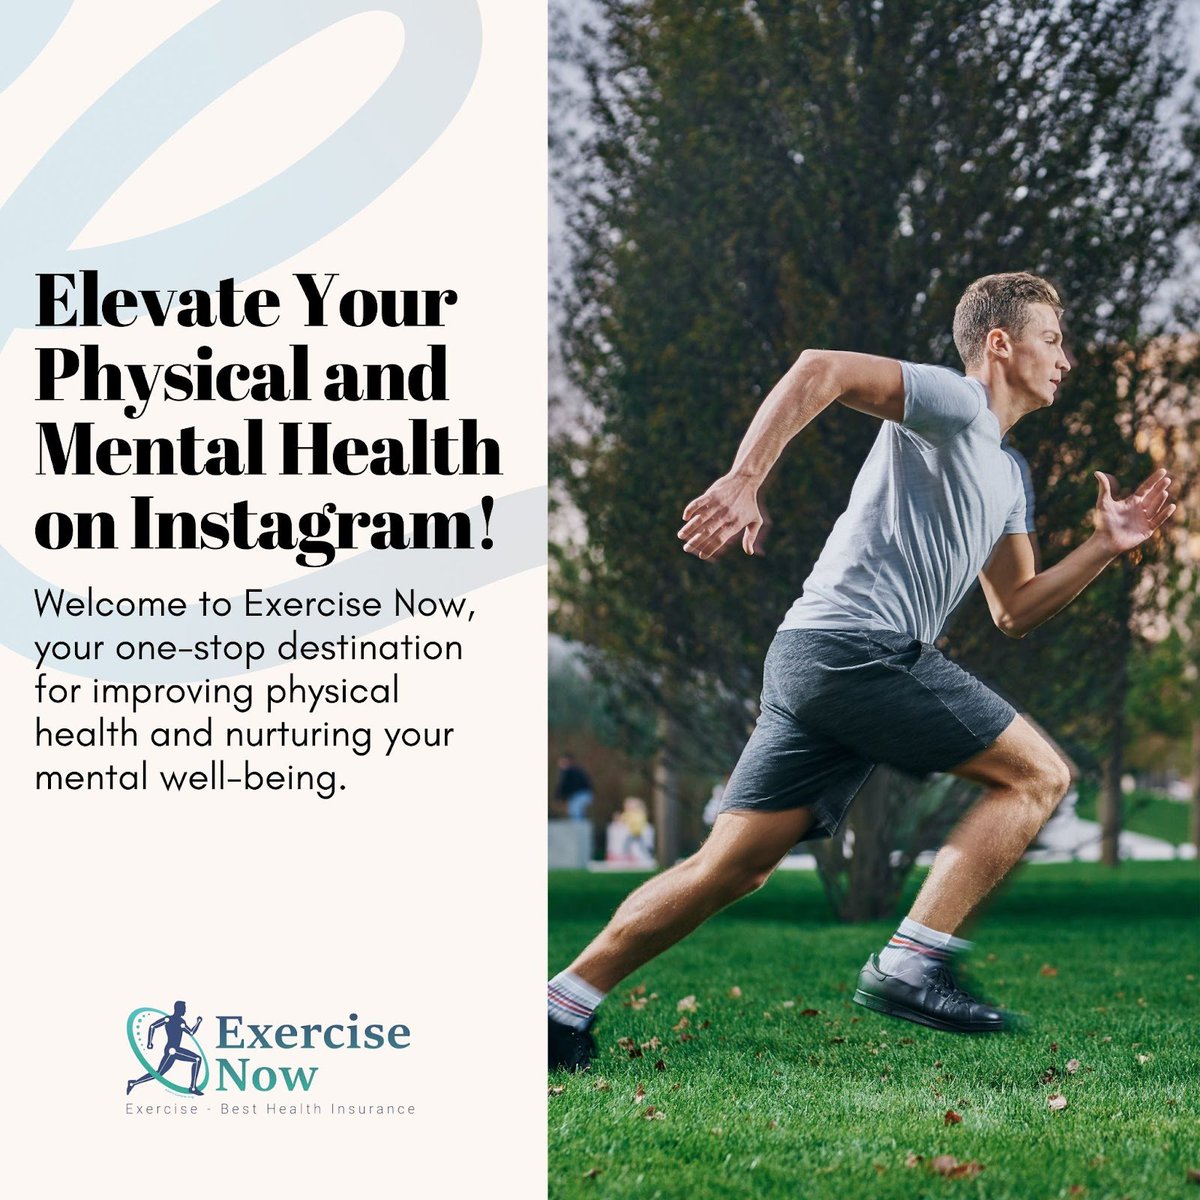 Welcome to Exercise Now, your one-stop destination for improving physical health and nurturing your mental well-being. Join us on Instagram instagram.com/exercisenow_or…
.
#ExerciseNow #PhysicalHealth #MentalWellness #FitnessVideos #HealthTips